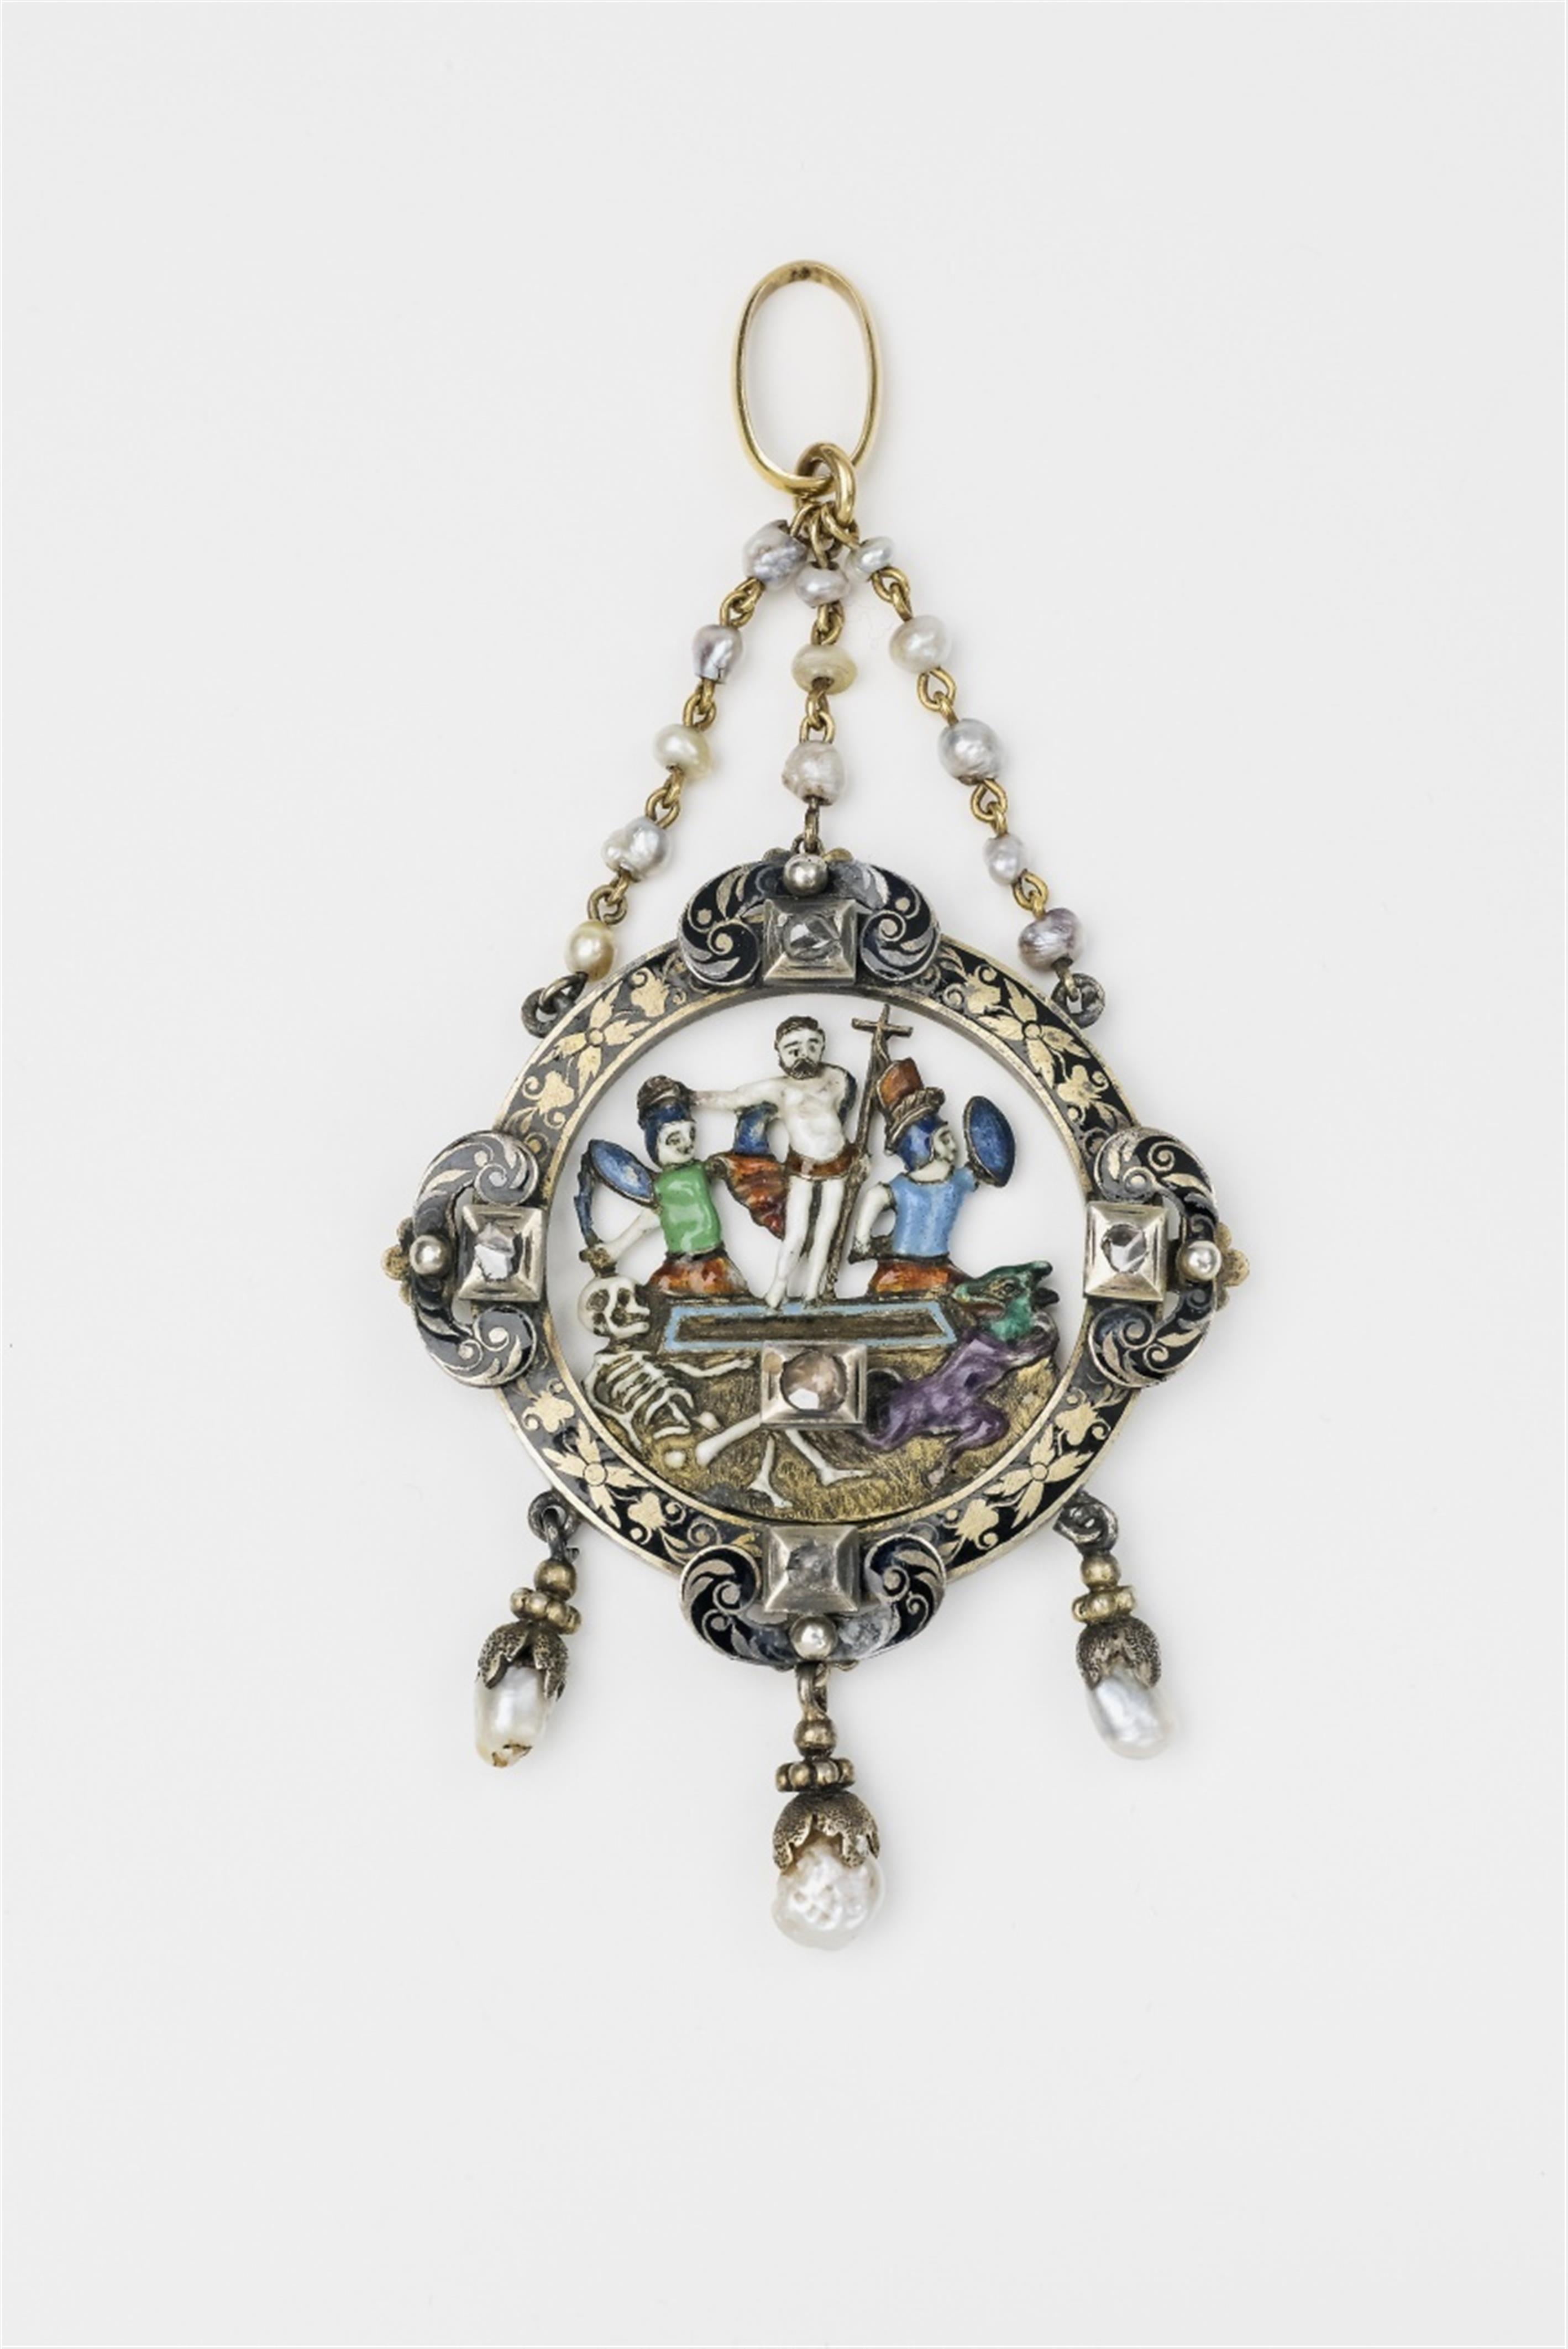 A gold and enamel Renaissance Revival pendant with the Resurrection of Christ - image-1